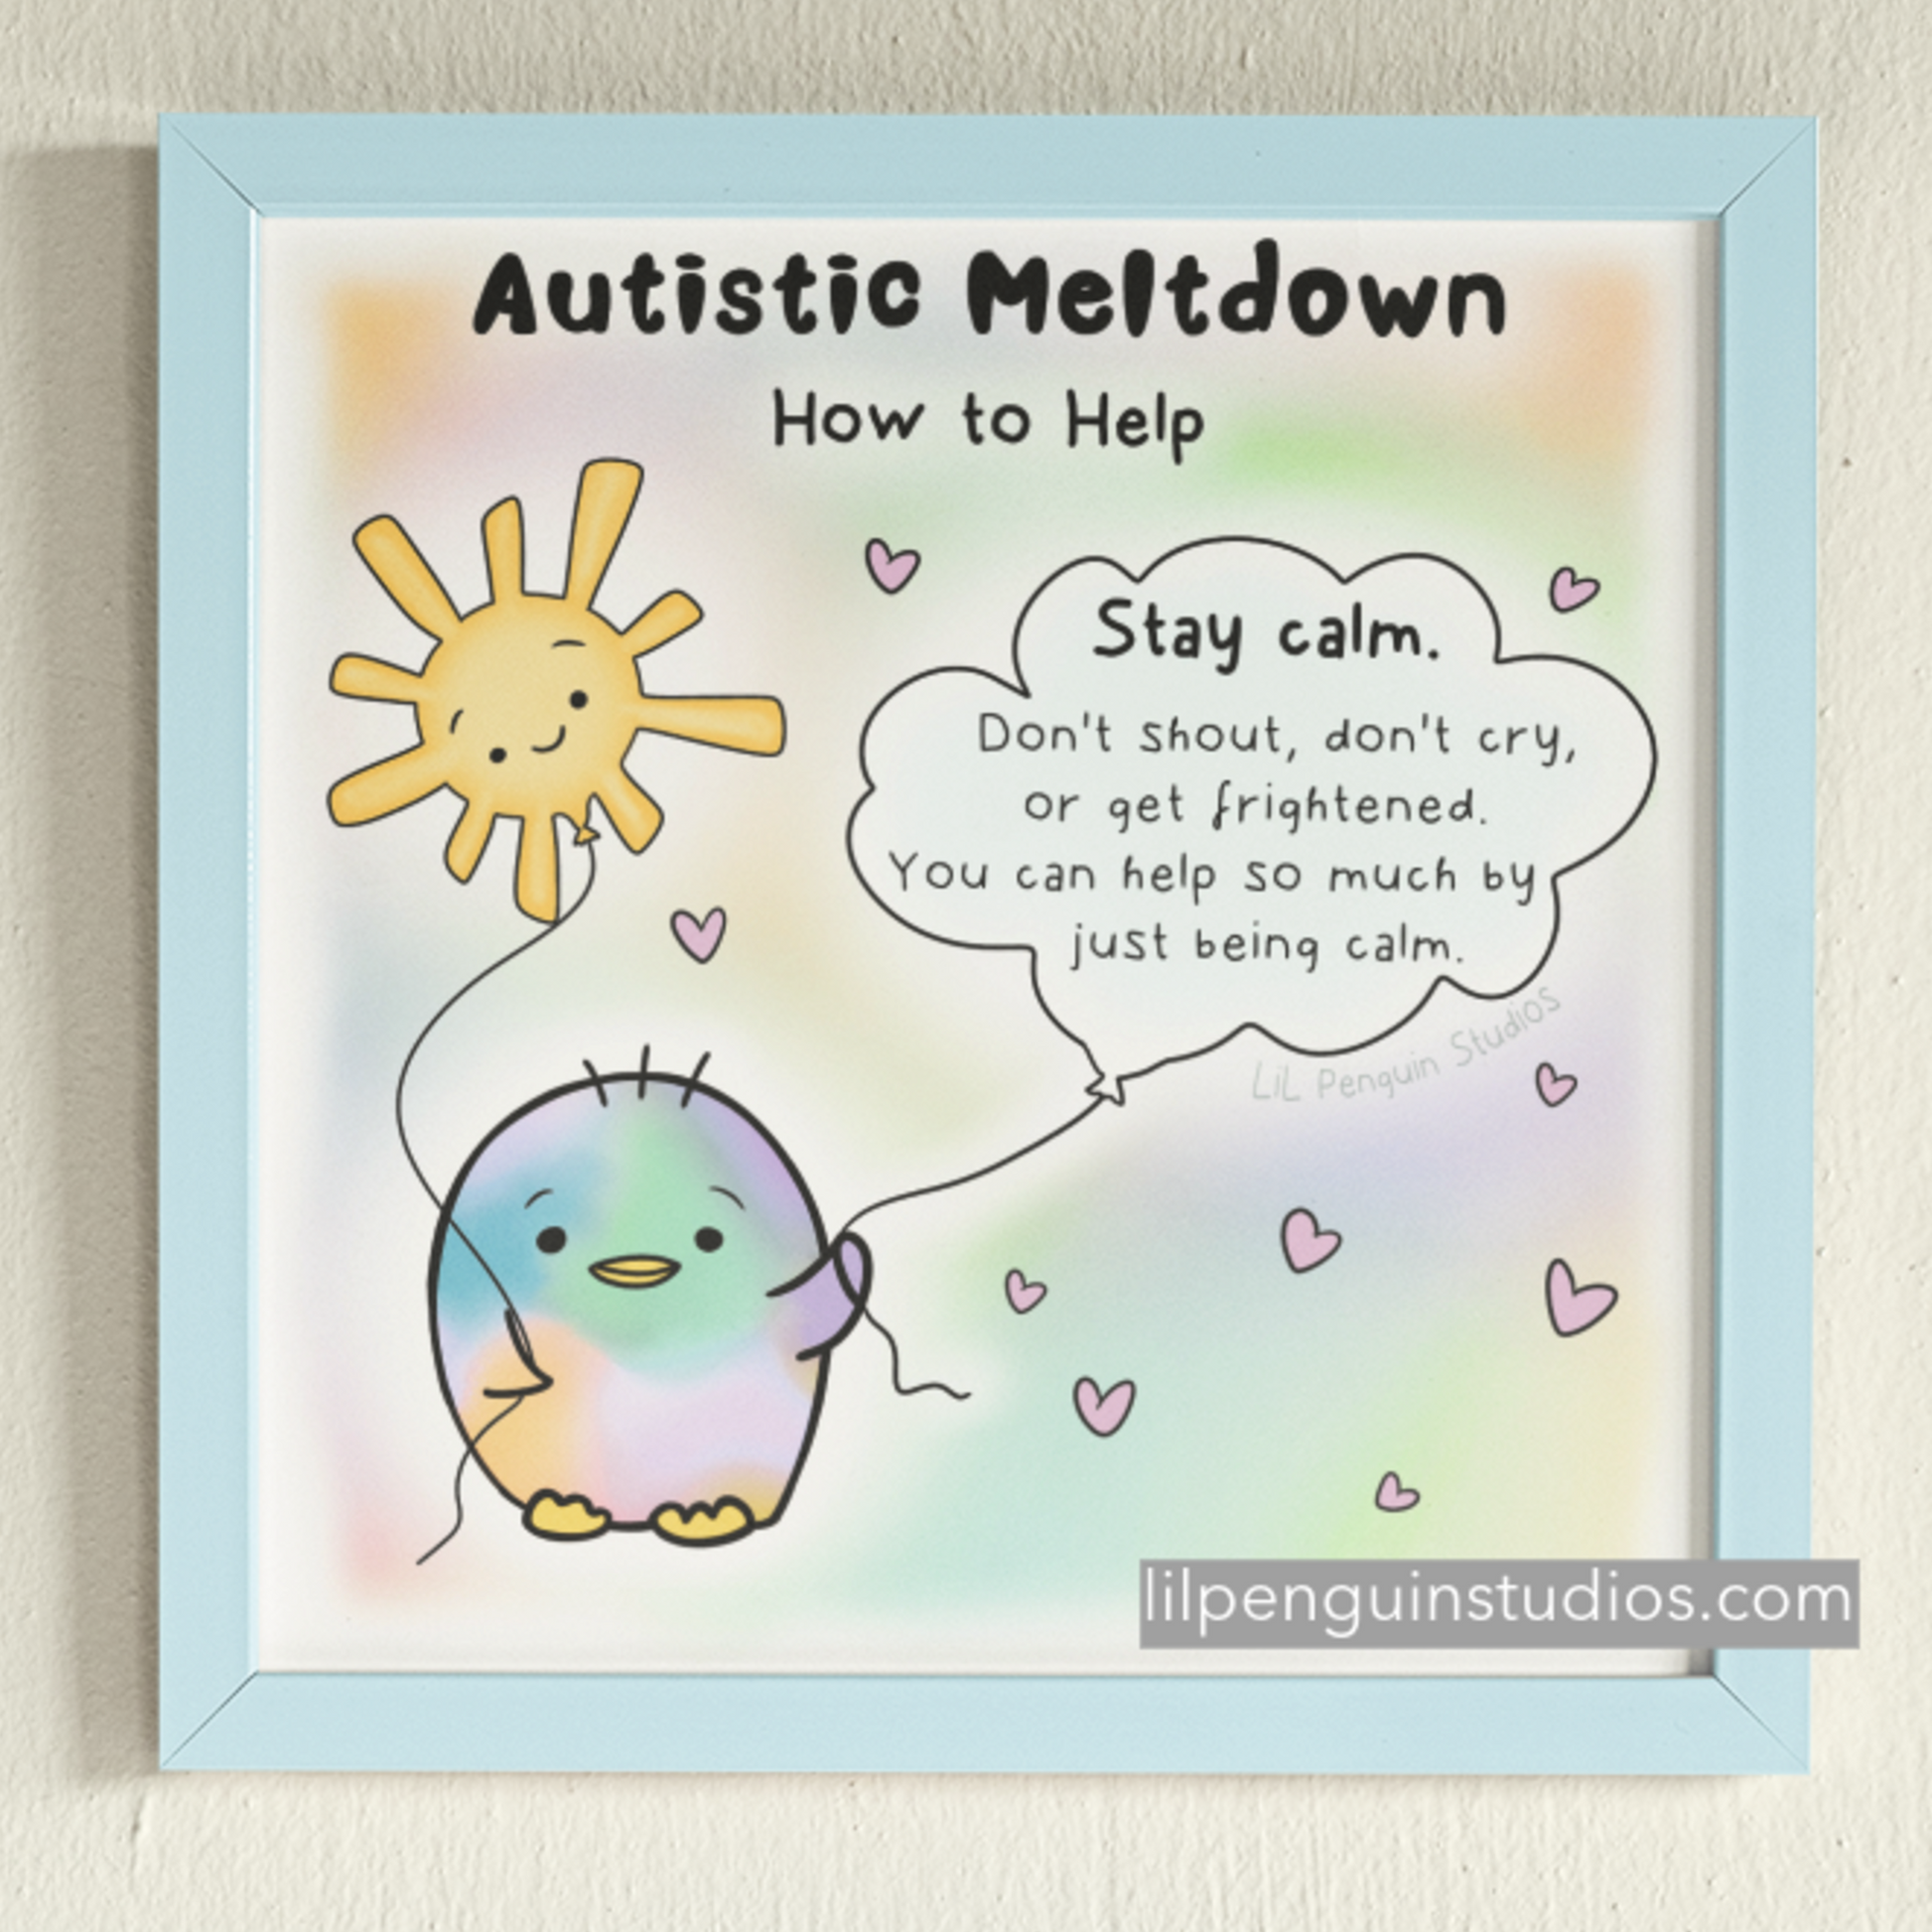 Autistic Meltdown, How to Help art print ("Stay calm").